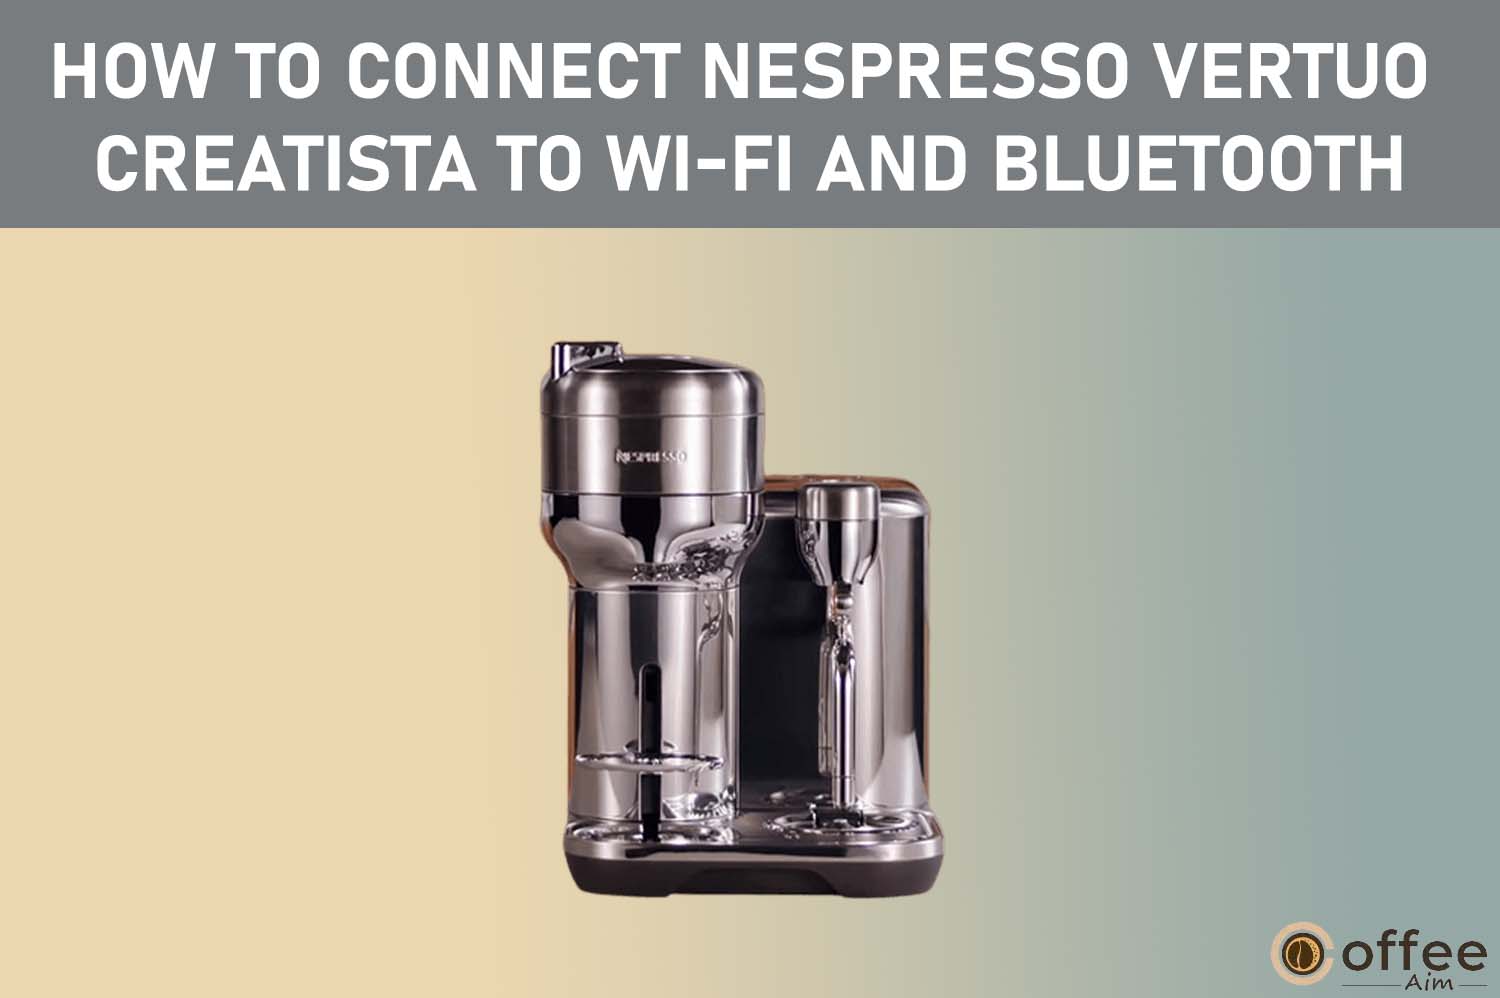 Featured image for the article "How to Connect Nespresso Vertuo Creatista to Wi-Fi and Bluetooth?"